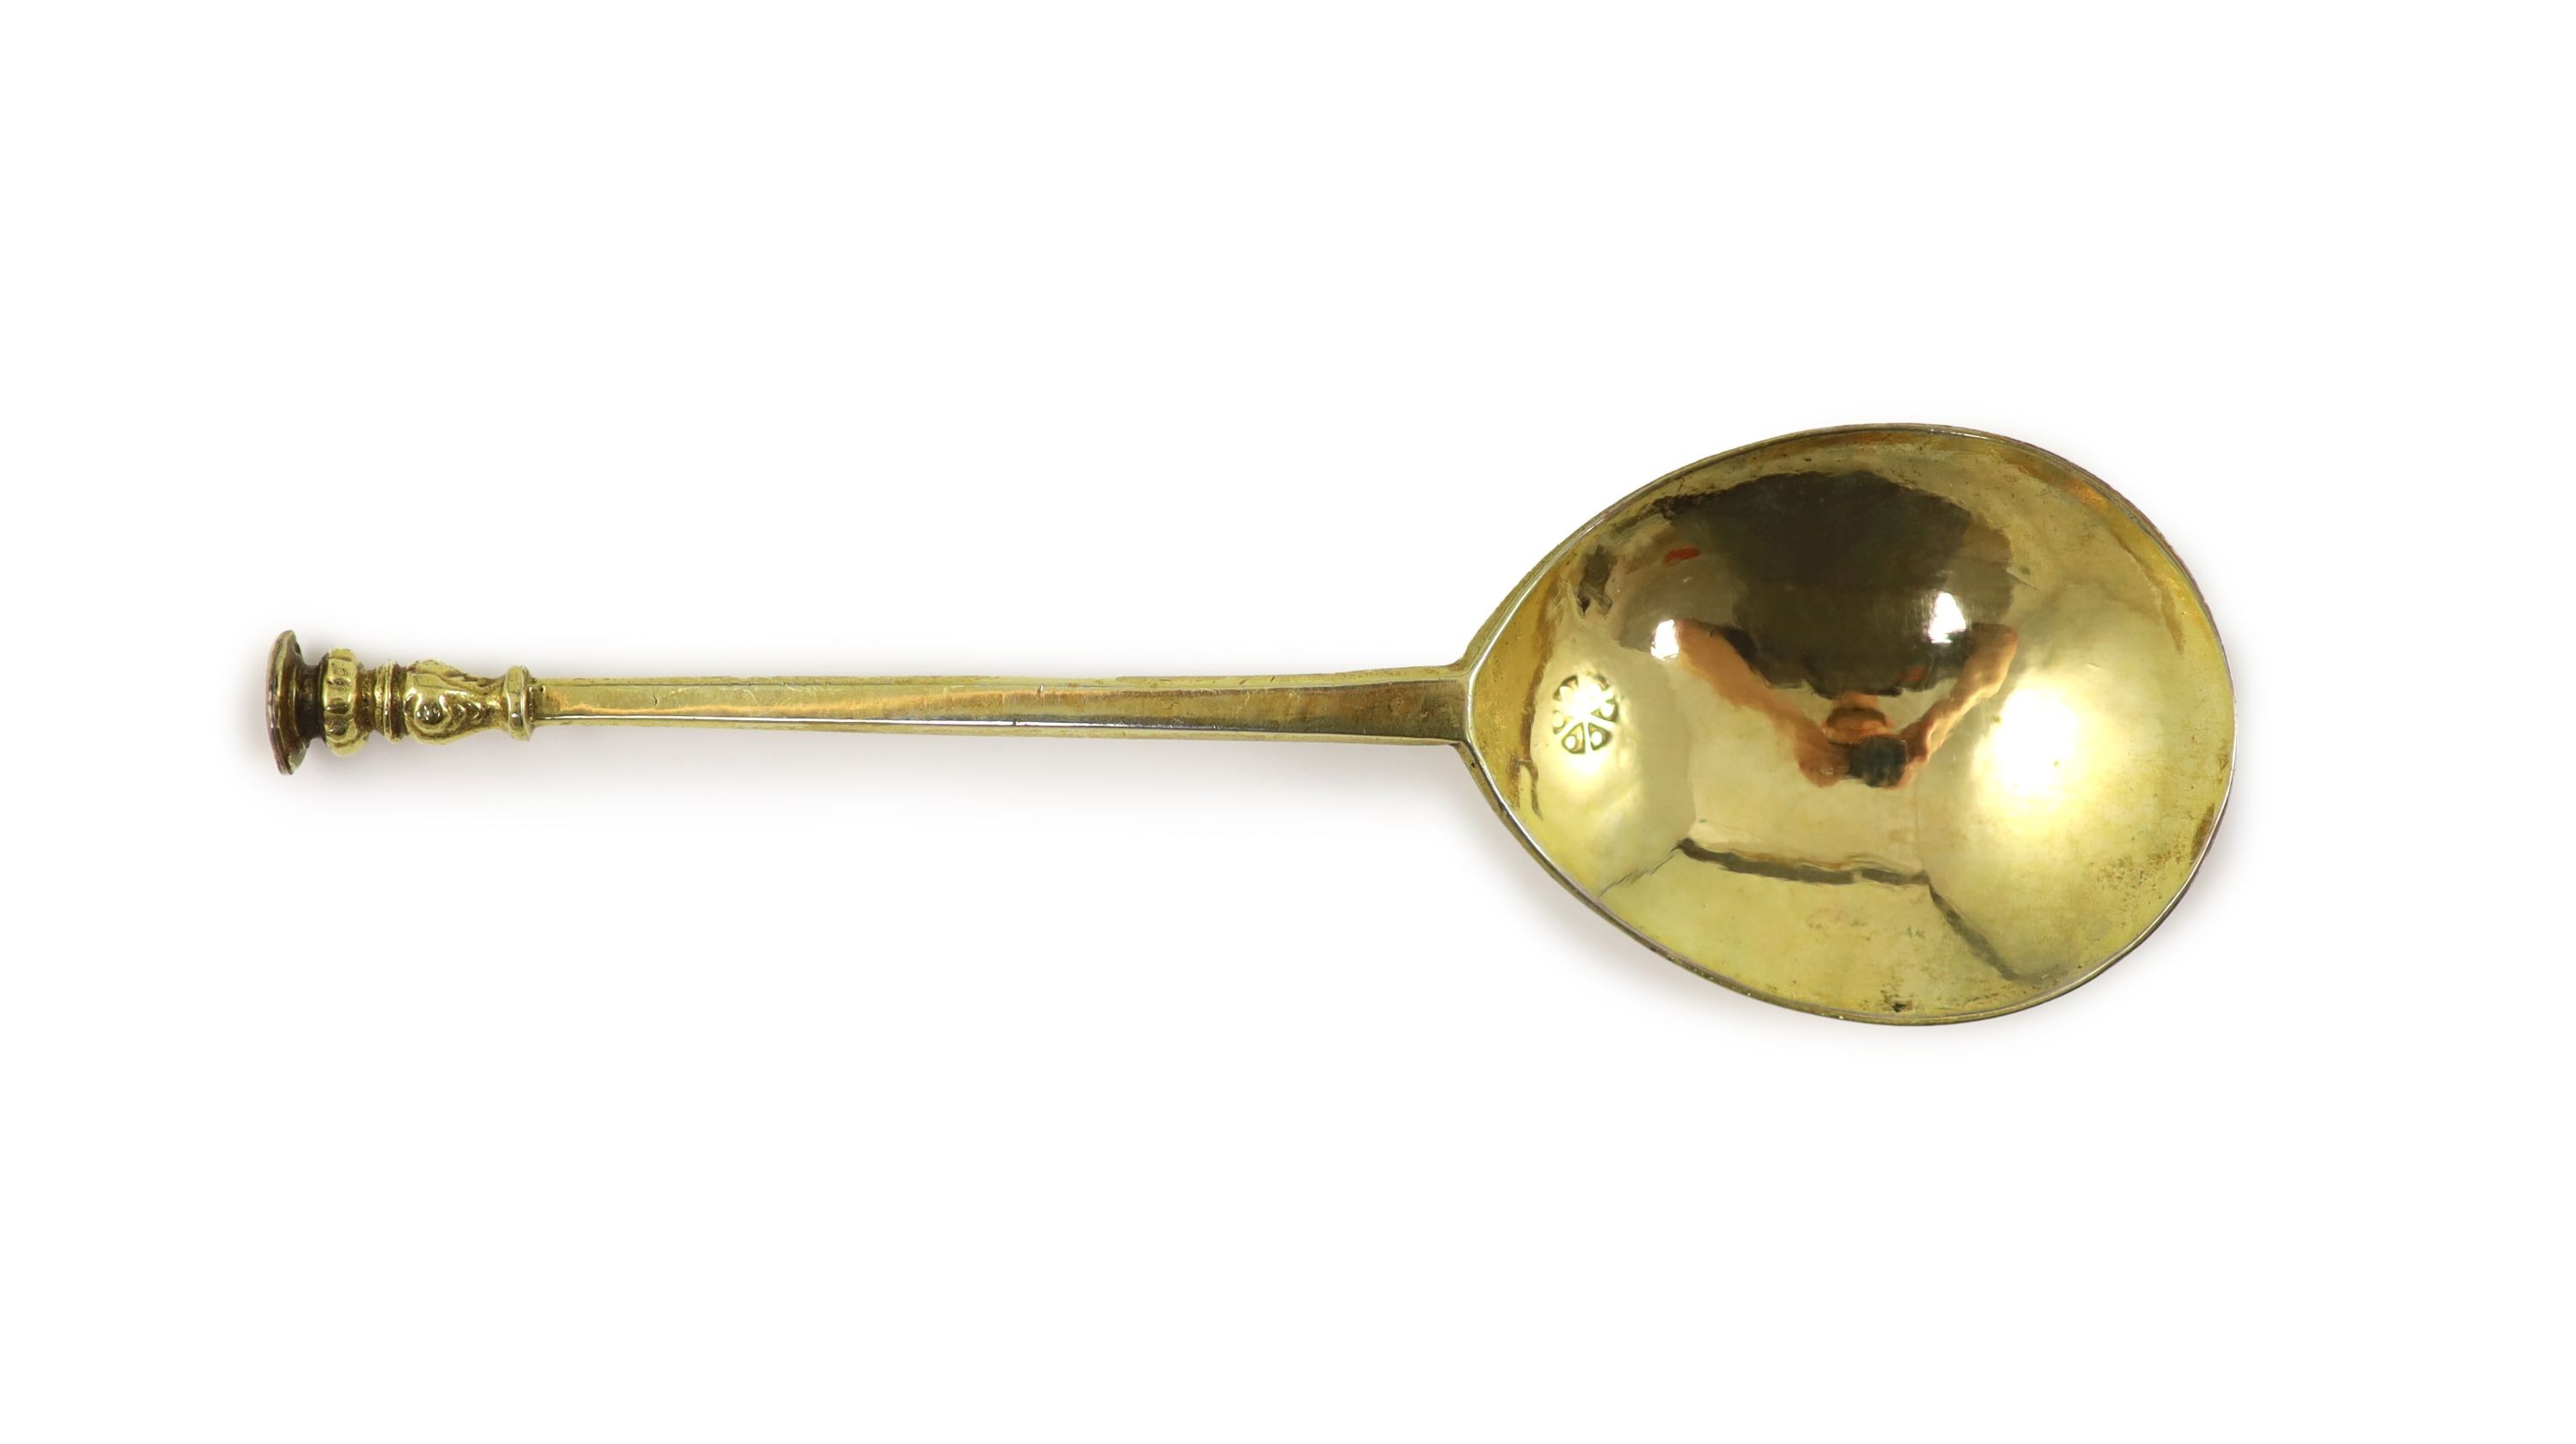 A 17th century silver gilt seal-top spoon, likely Wessex or West Country